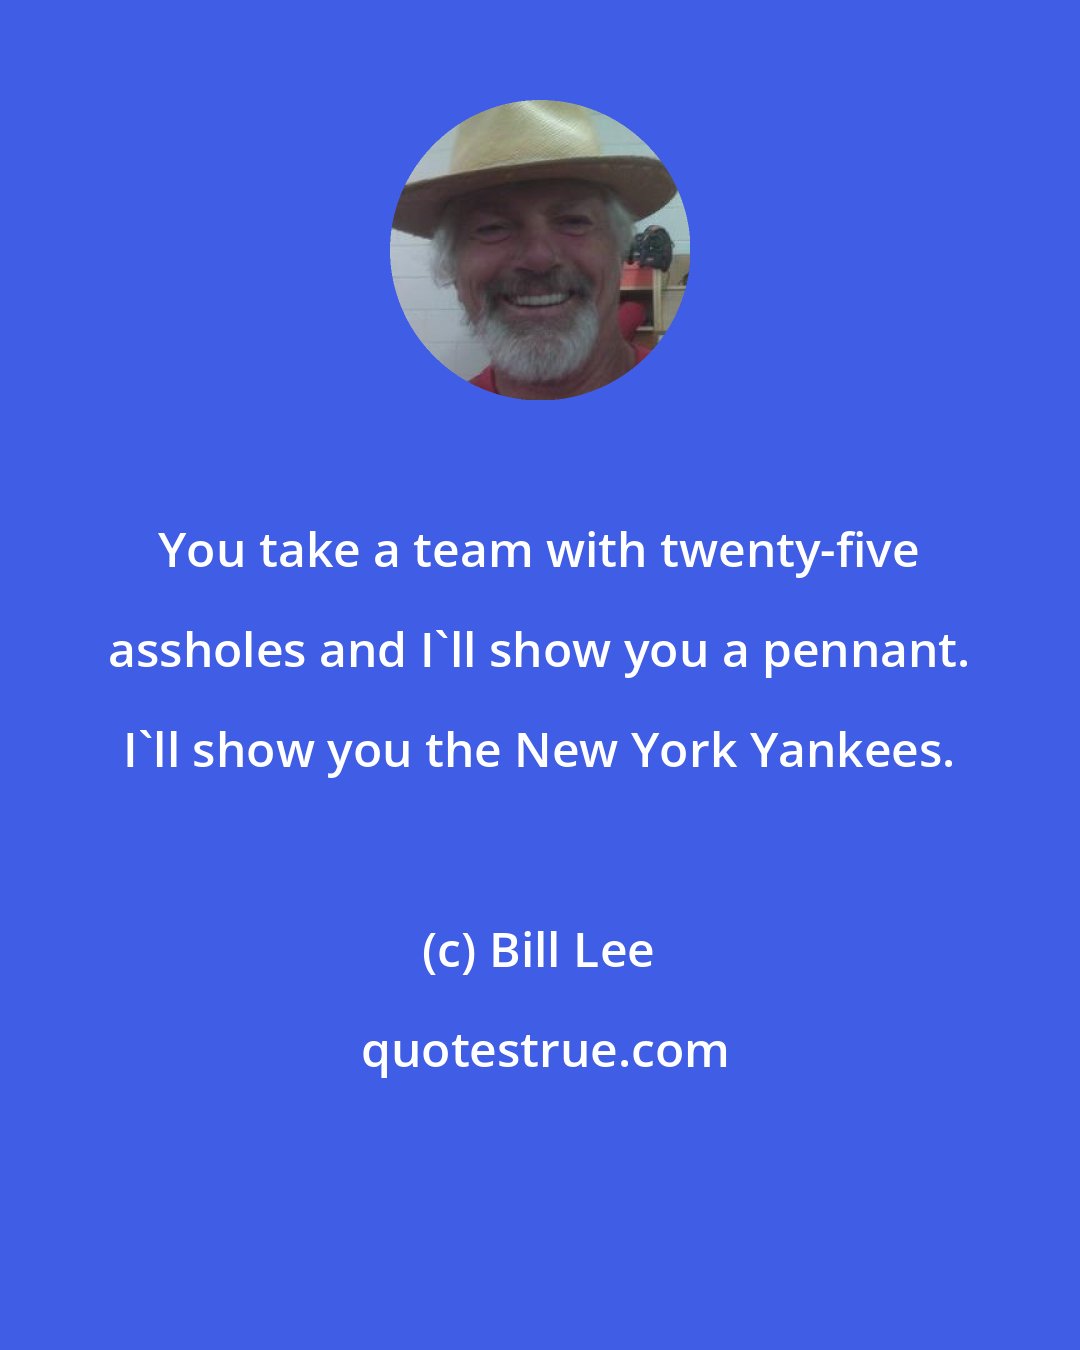 Bill Lee: You take a team with twenty-five assholes and I'll show you a pennant. I'll show you the New York Yankees.